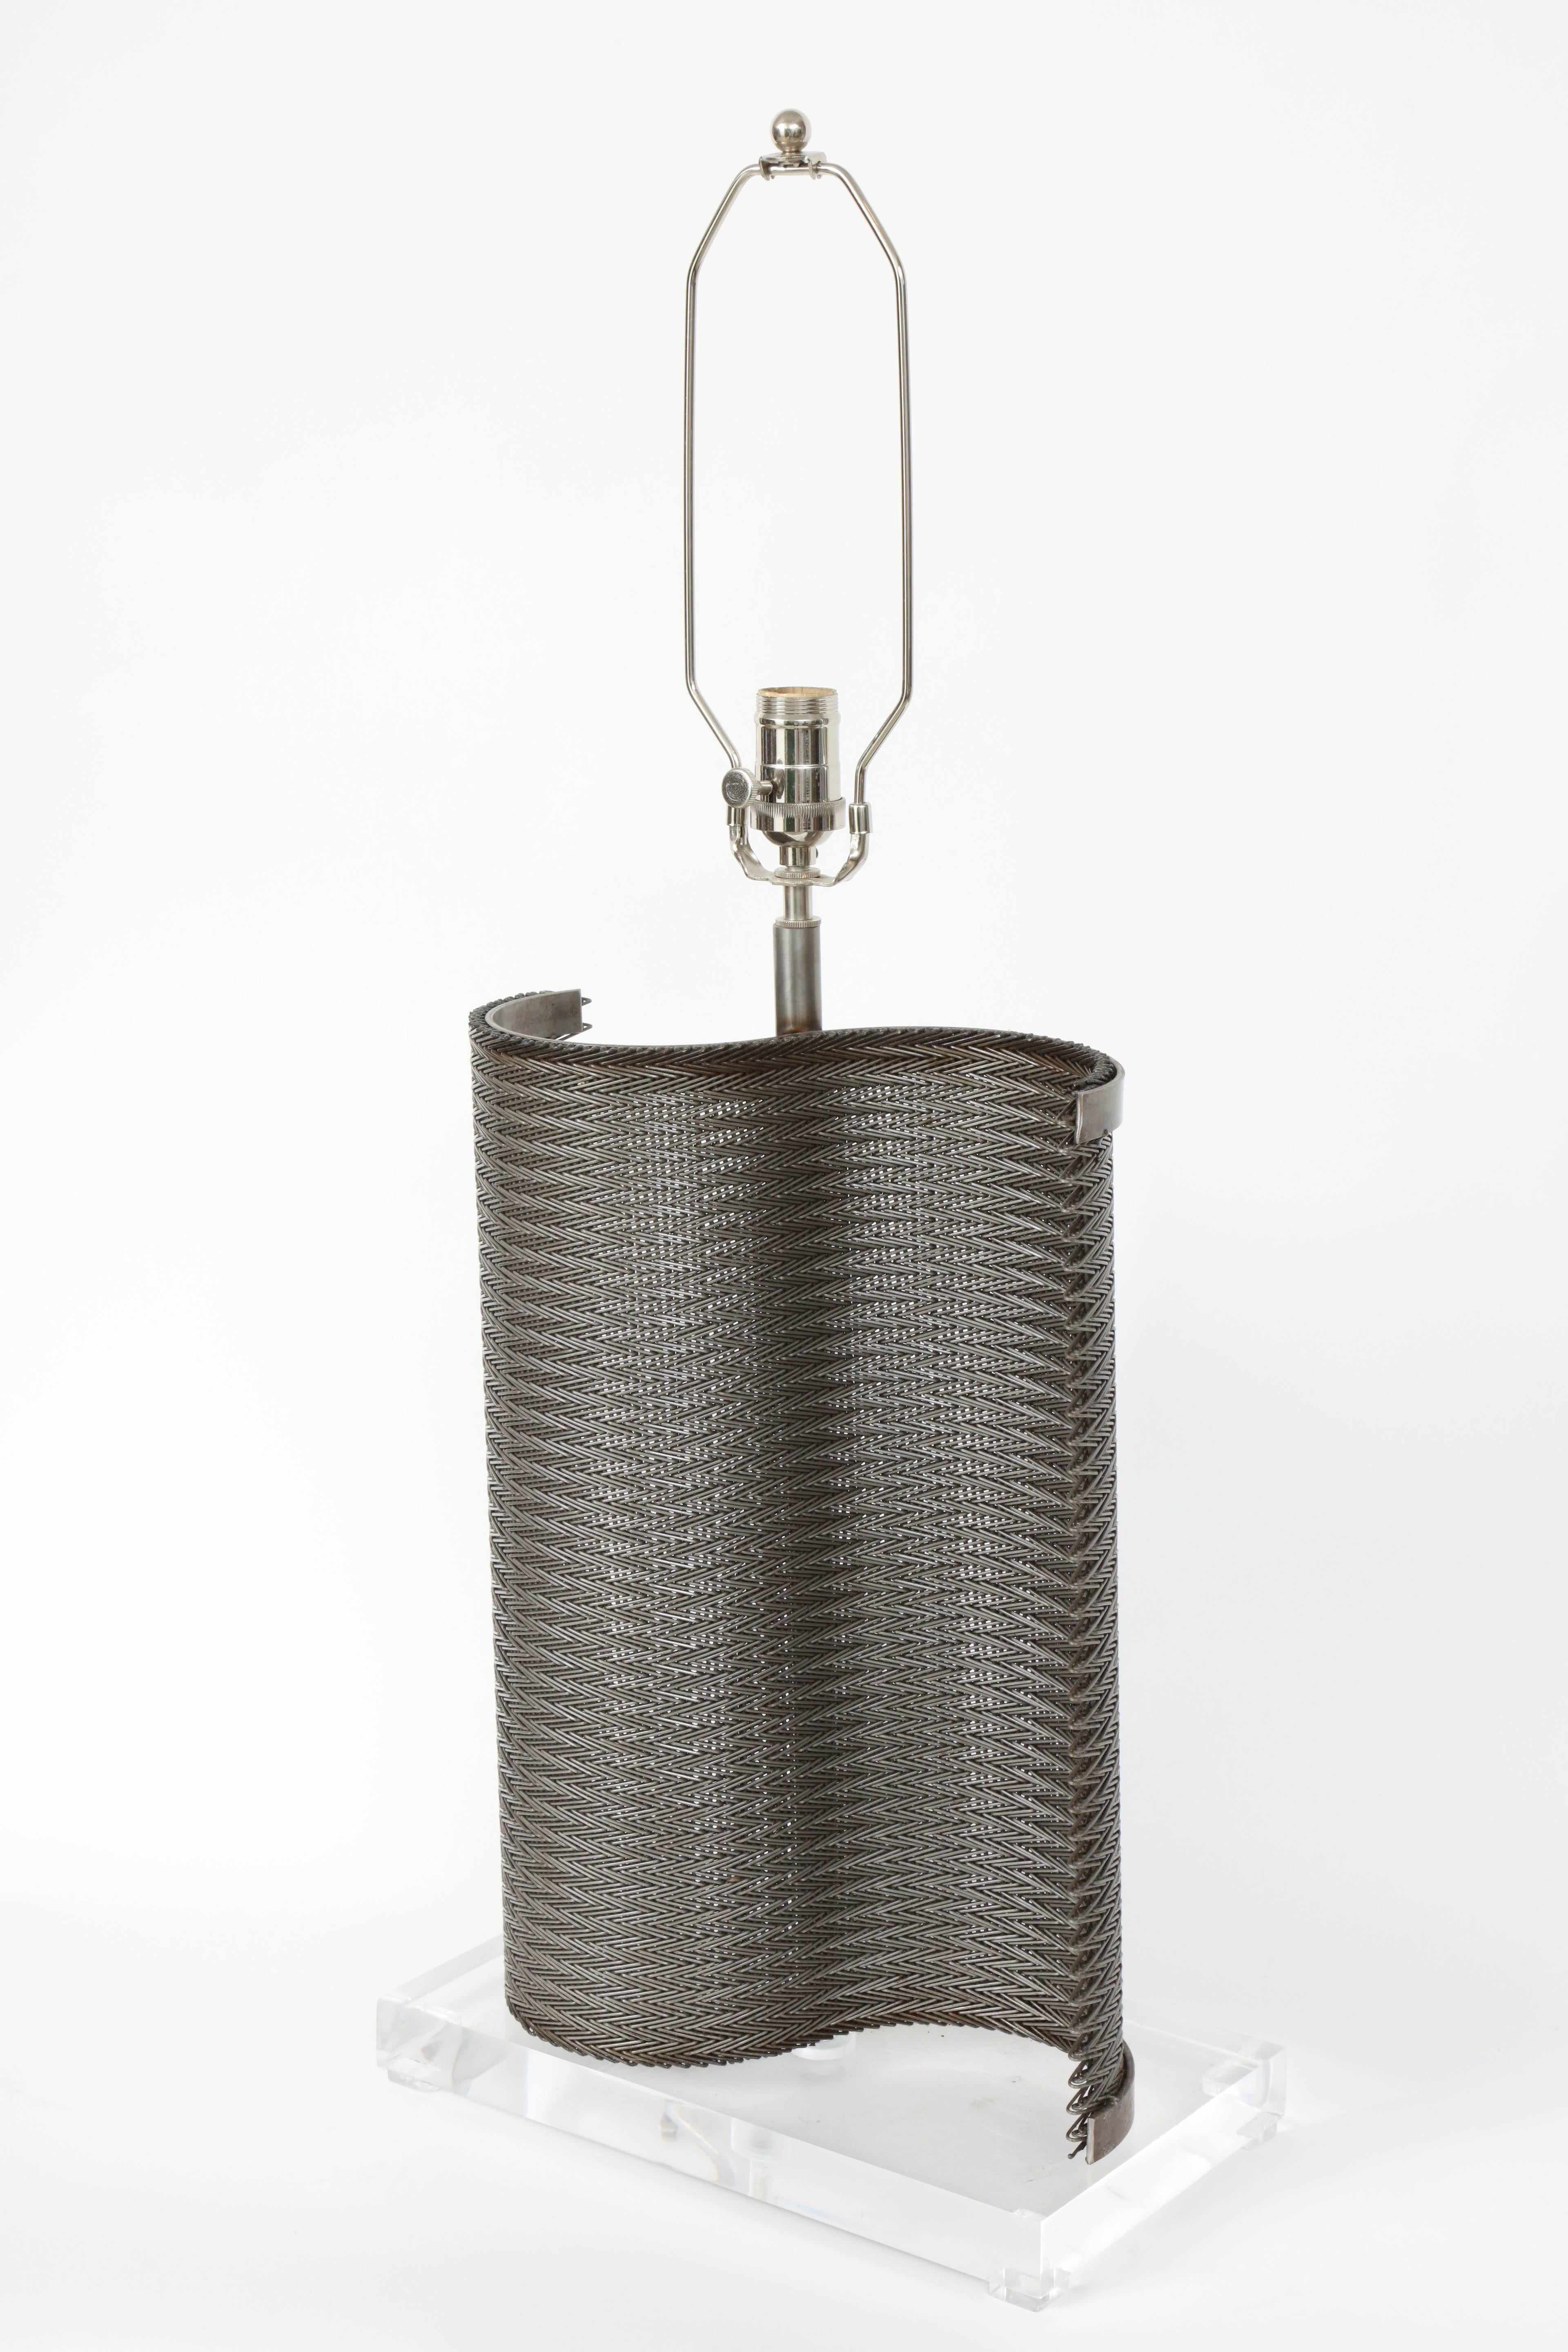 Pair of unique Industrial lamps made from repurposed steel conveyor belts in a wave pattern mounted on Lucite bases.